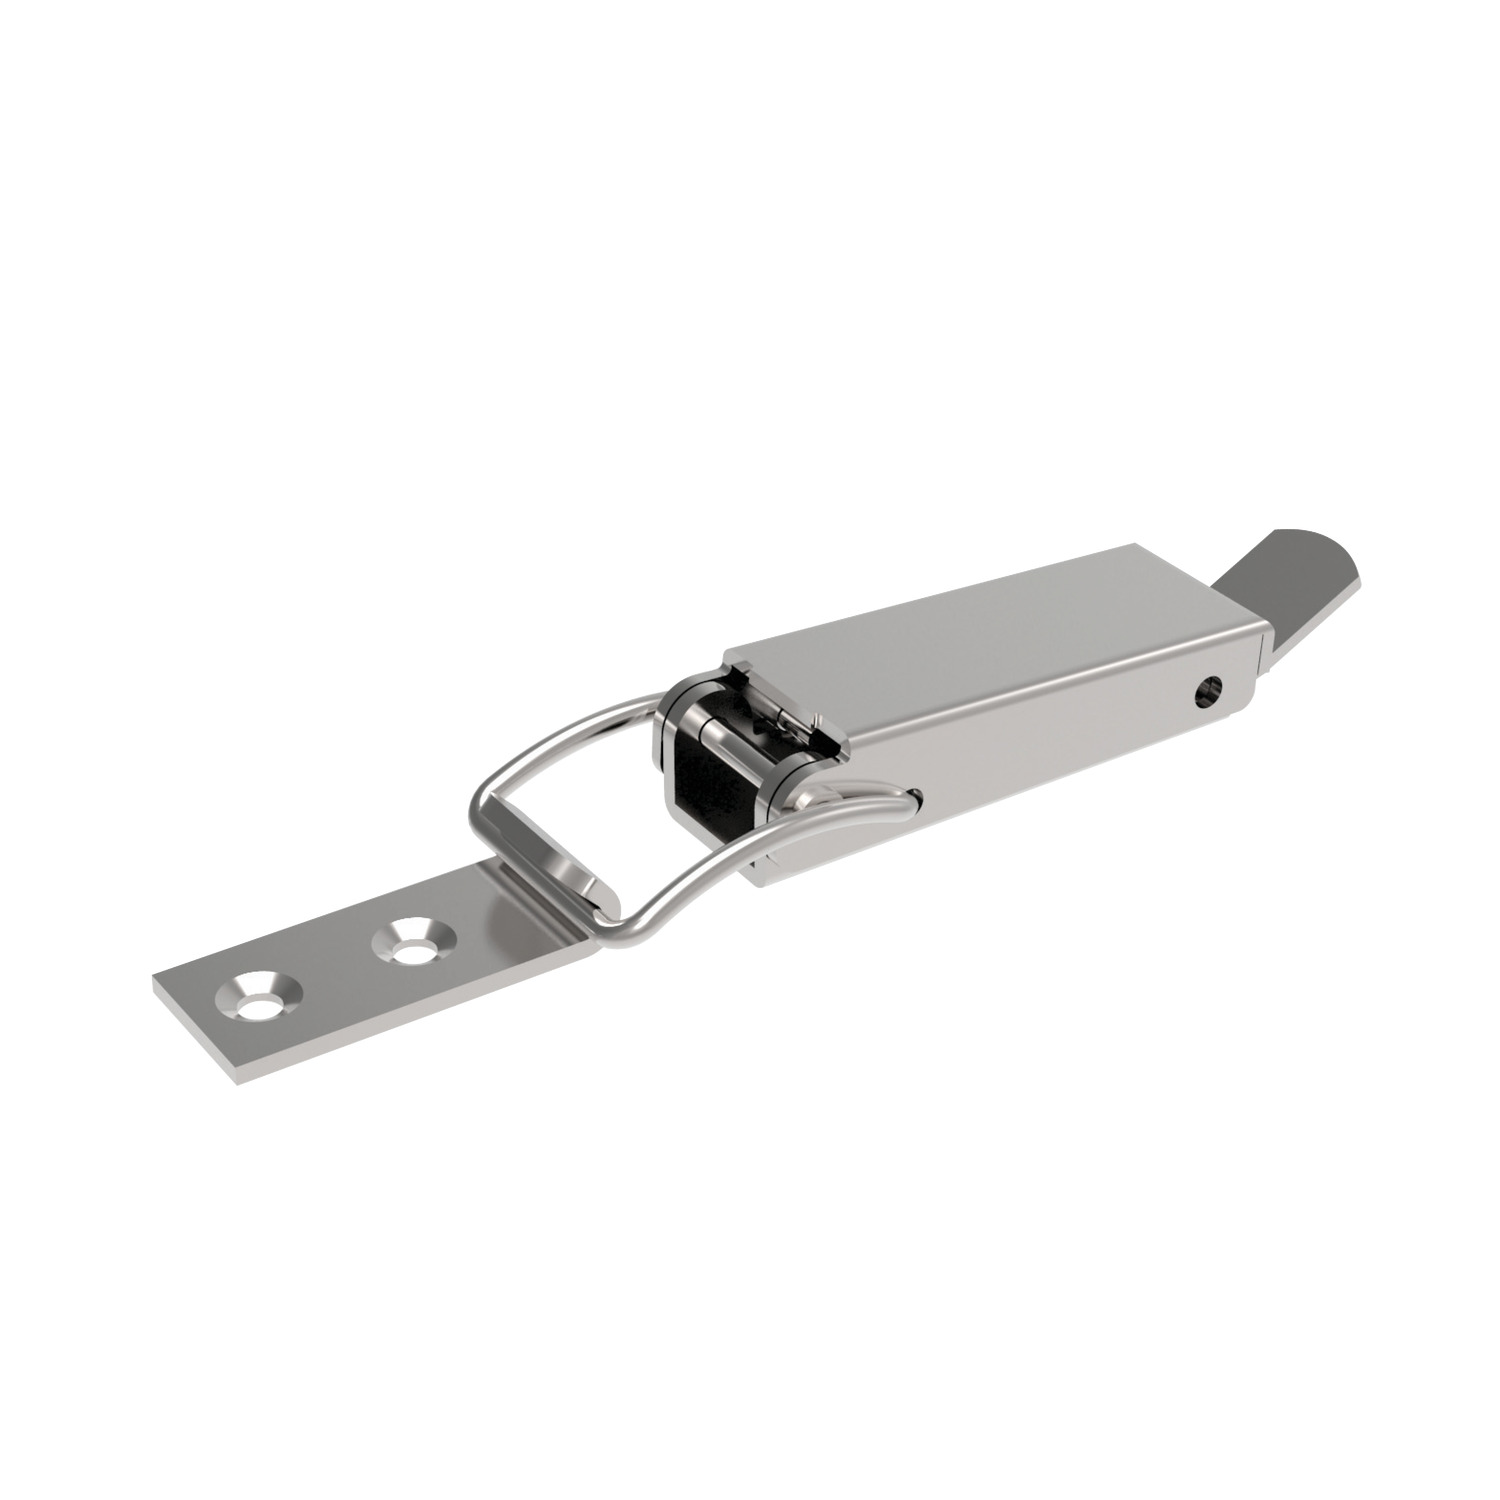 J0440.AC0004 Toggle Latches Zinc Plated Steel - 102 - 11 - 23